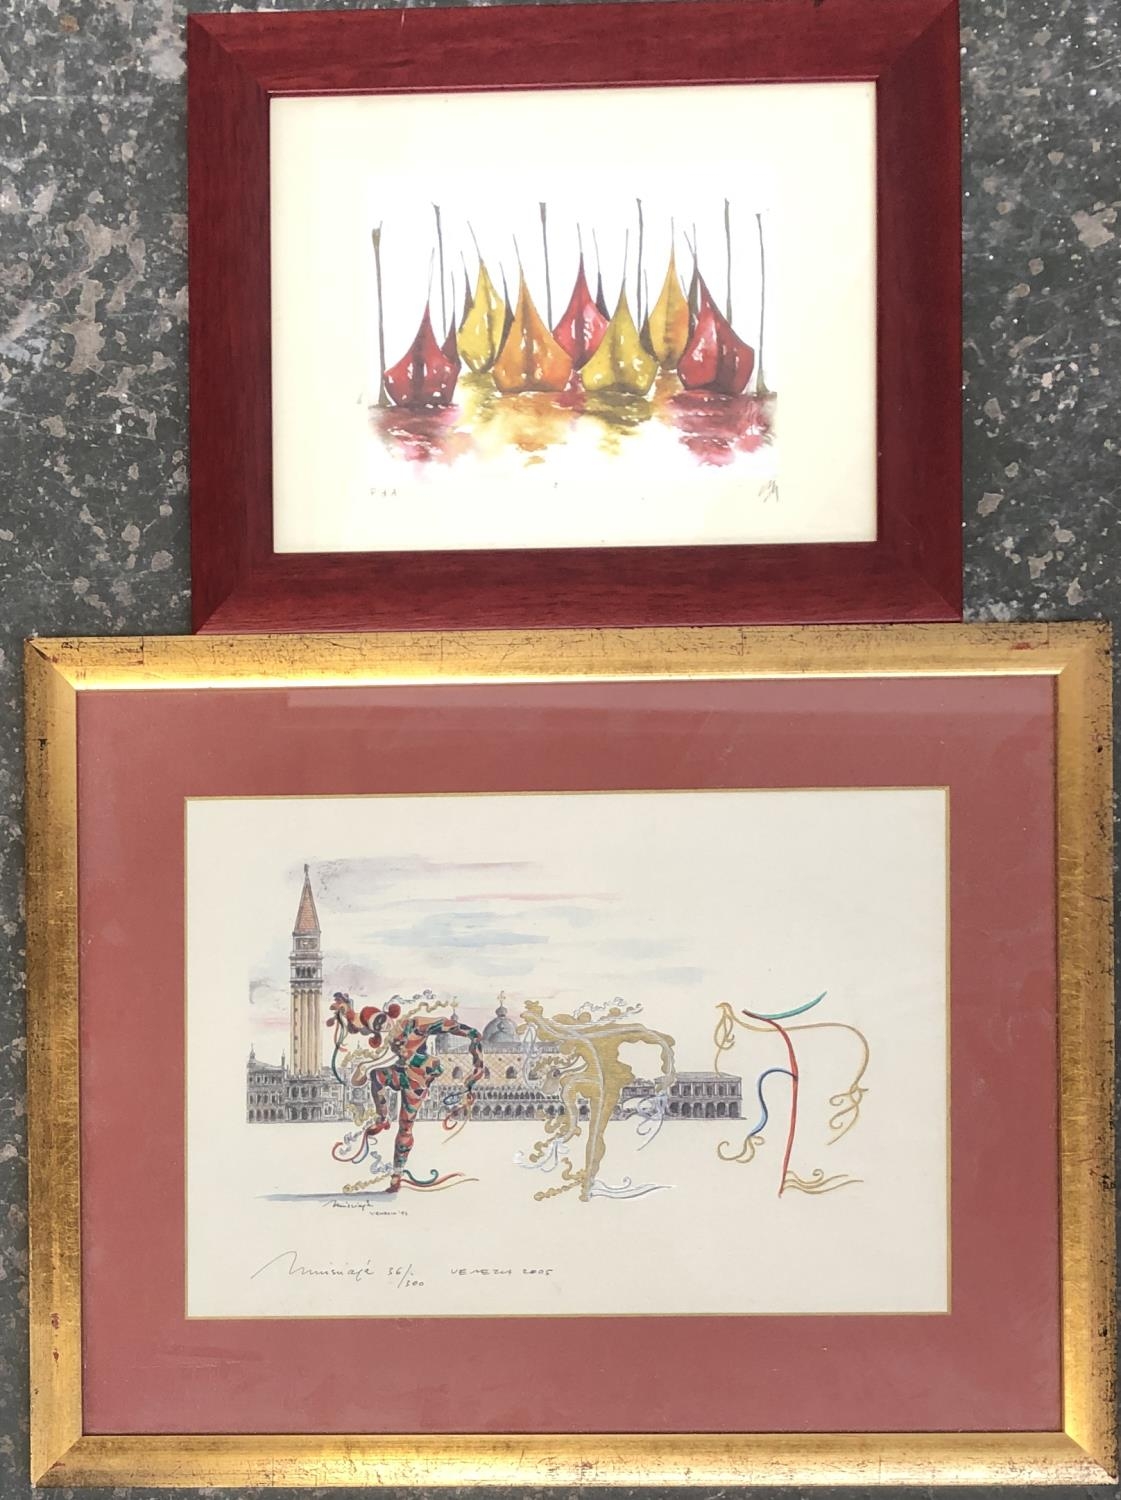 Monica Martin, print of Venetian gondolas, signed in pencil lower right, with Itaca gallery blind